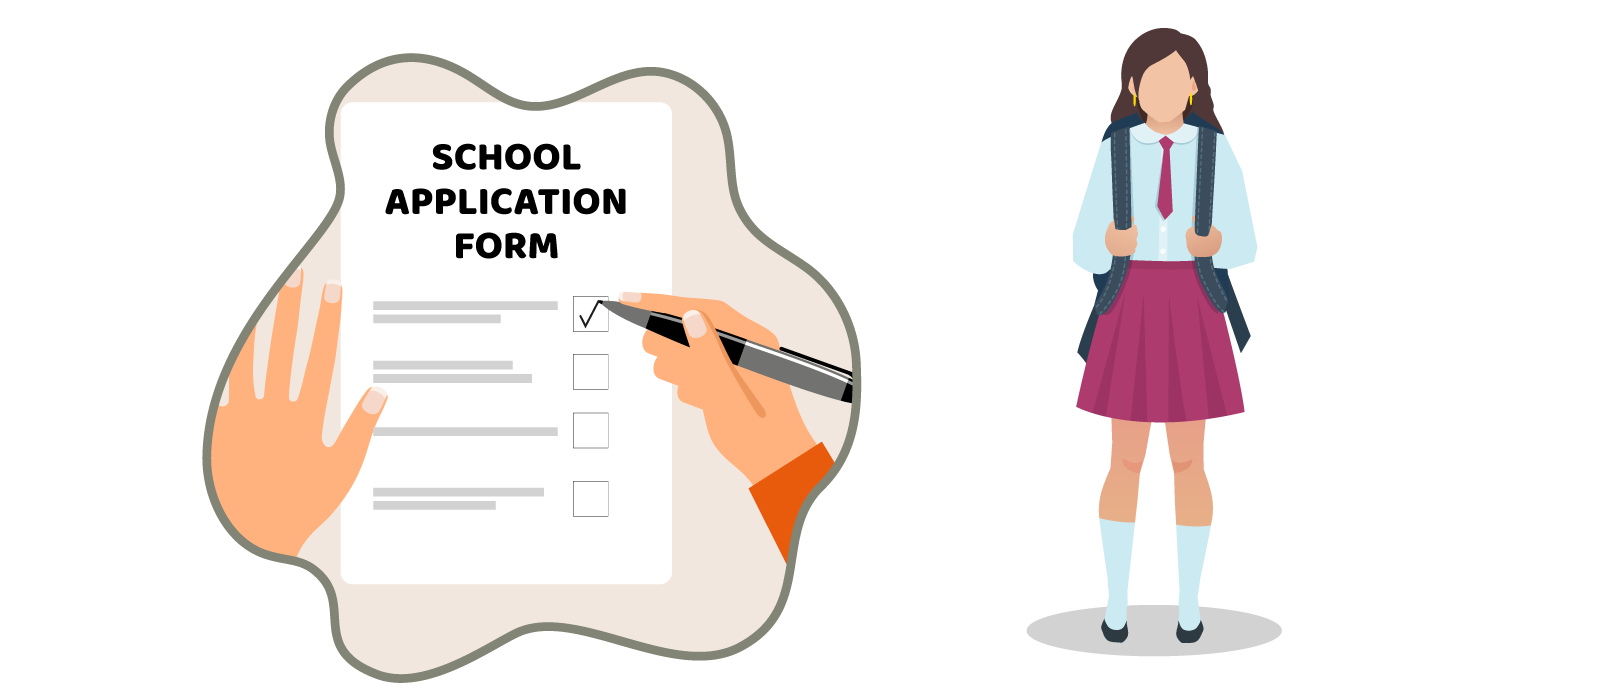 Application form for school and child's first day at school